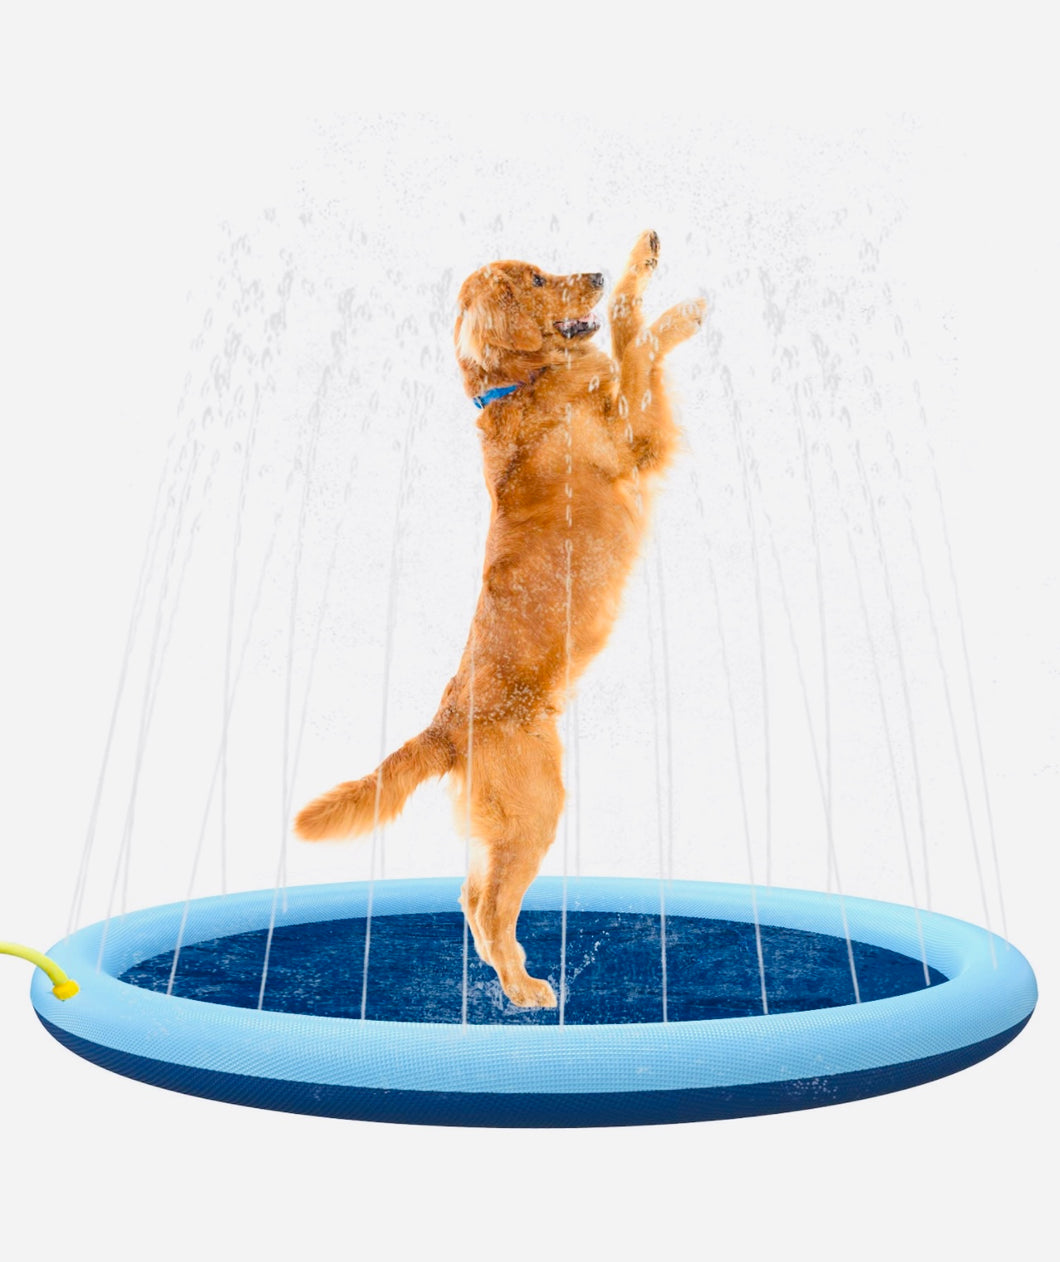 Splash Sprinkler Pad Dogs Kids.59” Thicken Dog Pool With Sprinkler ,Outdoor water Play Mat for Dogs & Cats